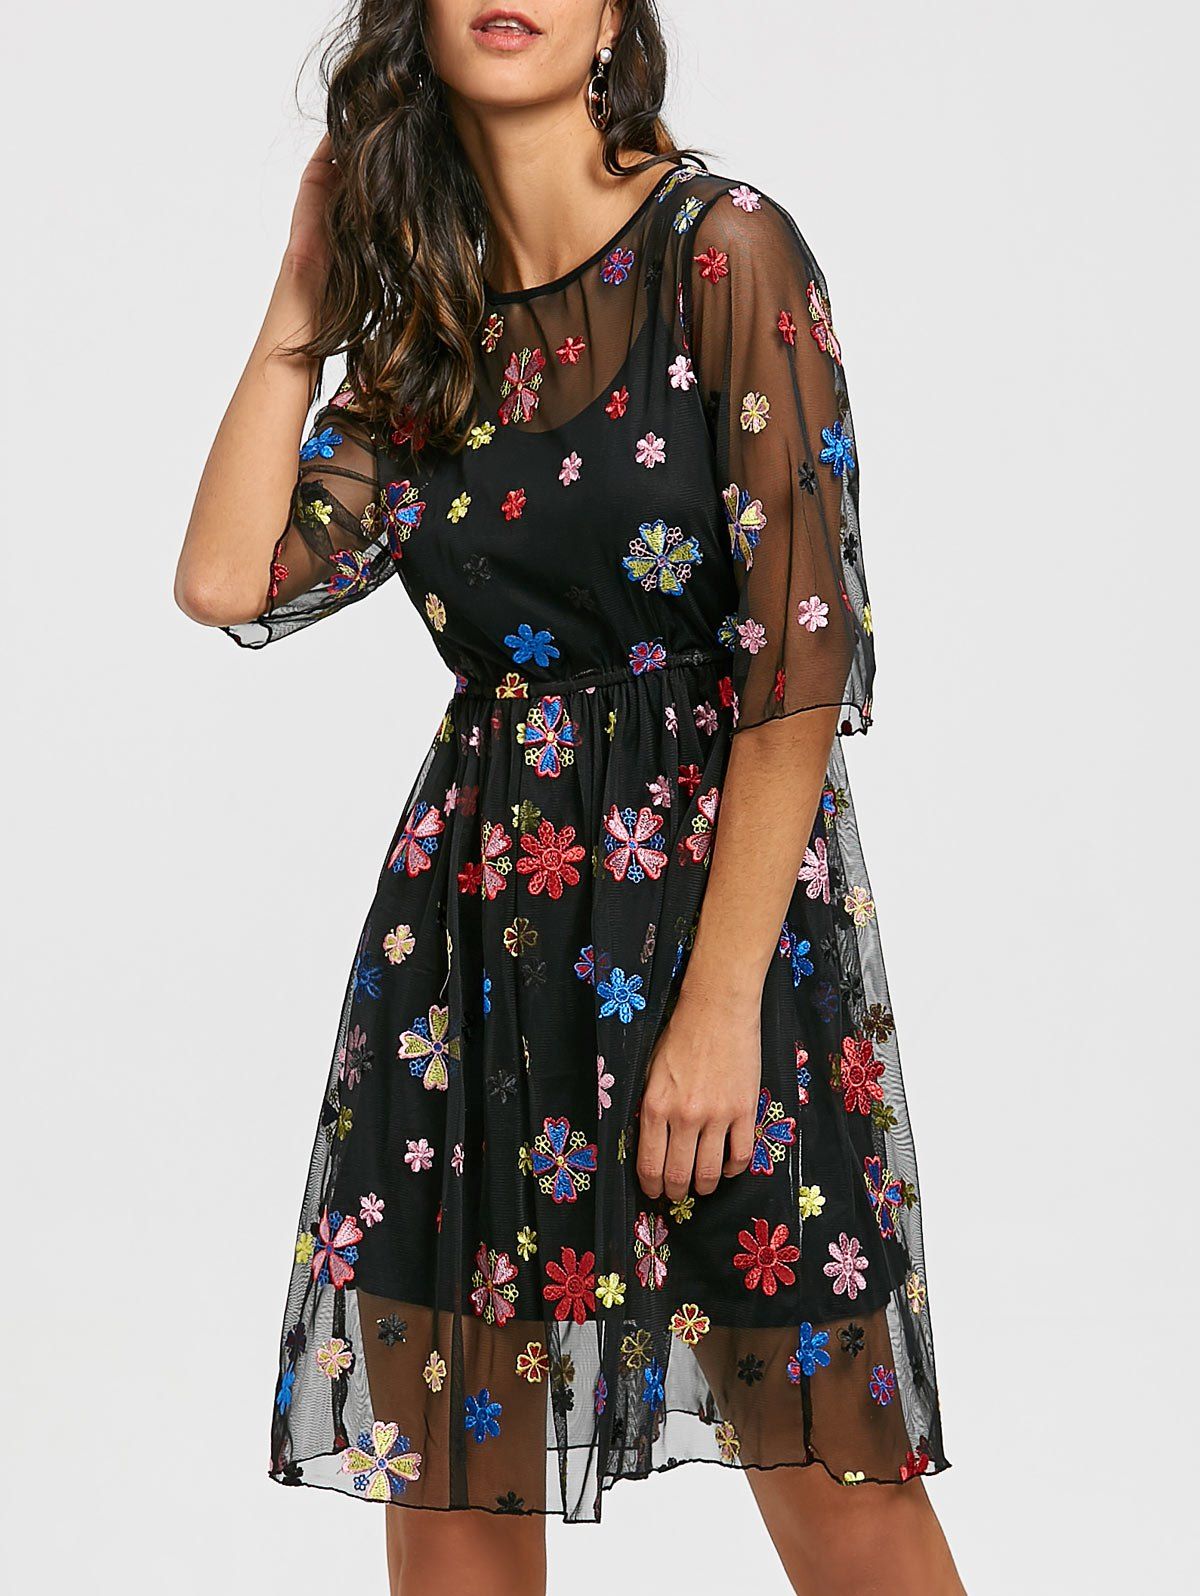 See Thru Embroidery Floral Dress and Cami Dress -  